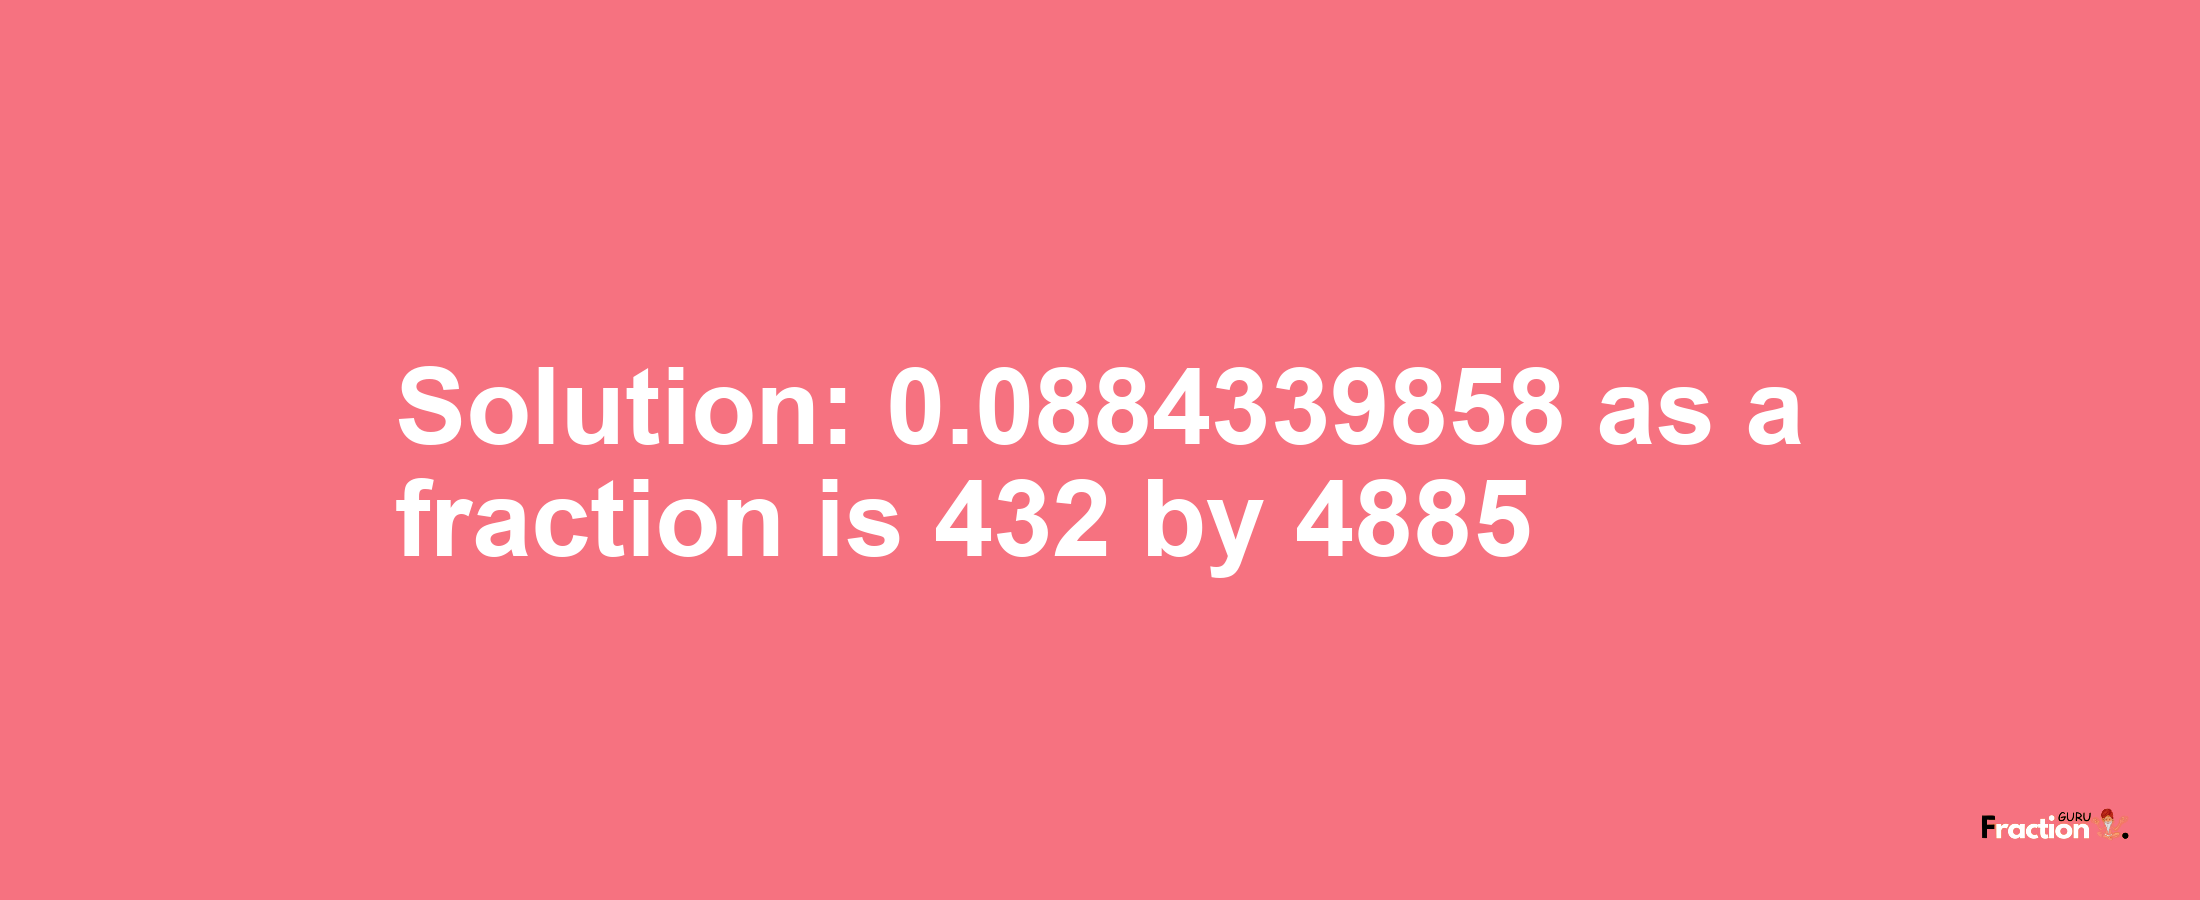 Solution:0.0884339858 as a fraction is 432/4885